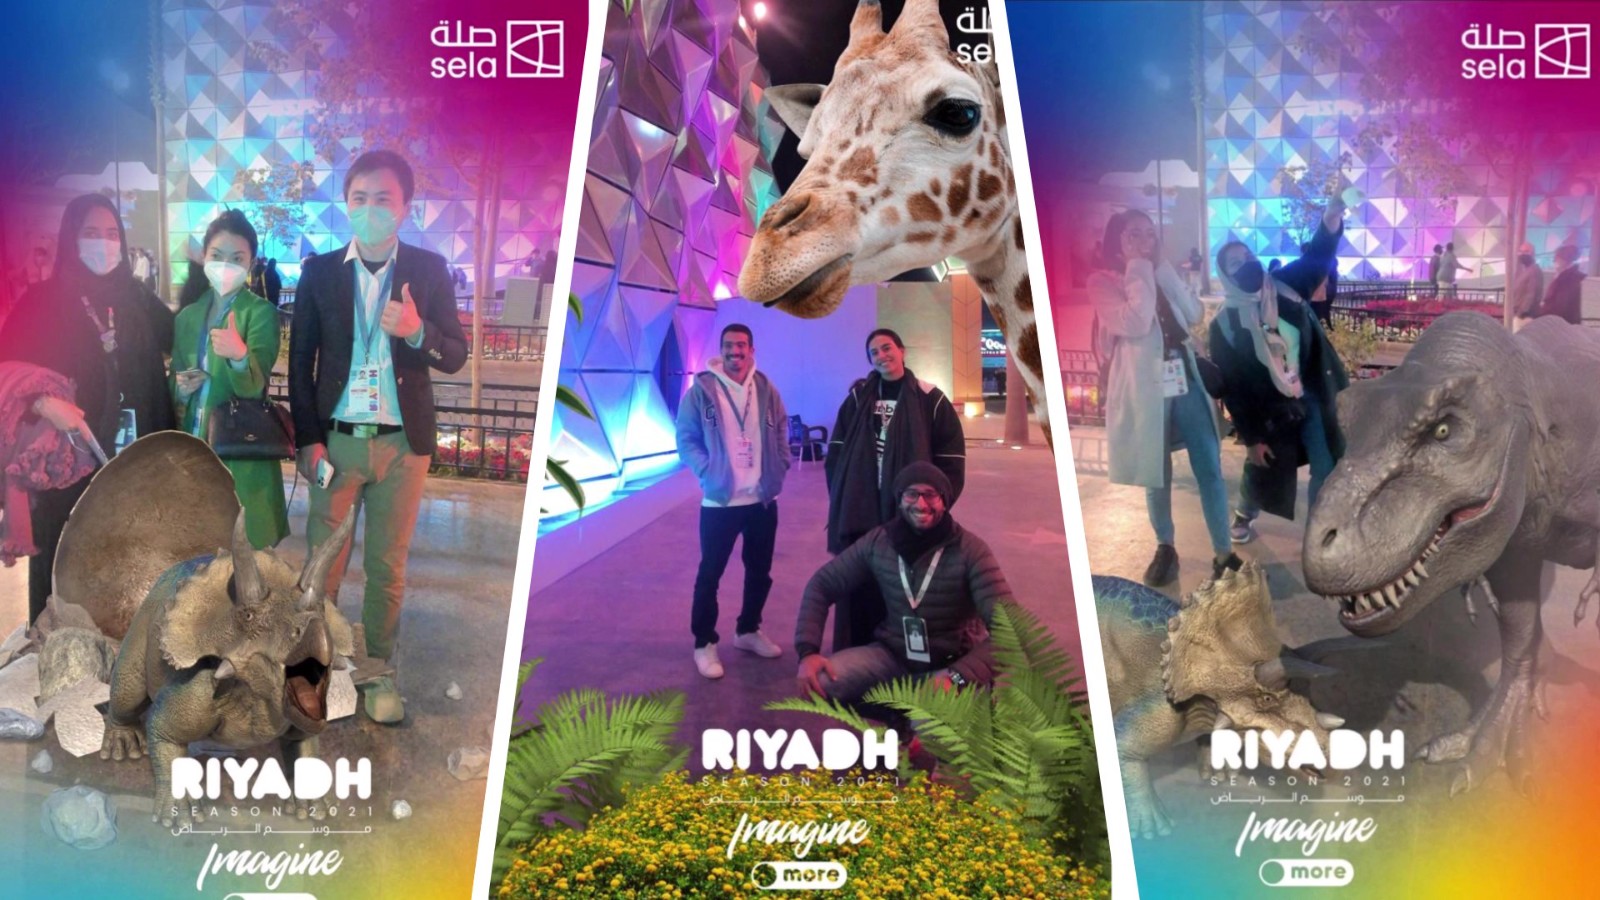 The AR Photobooth created an immersive and interactive experience for visitors..jpg